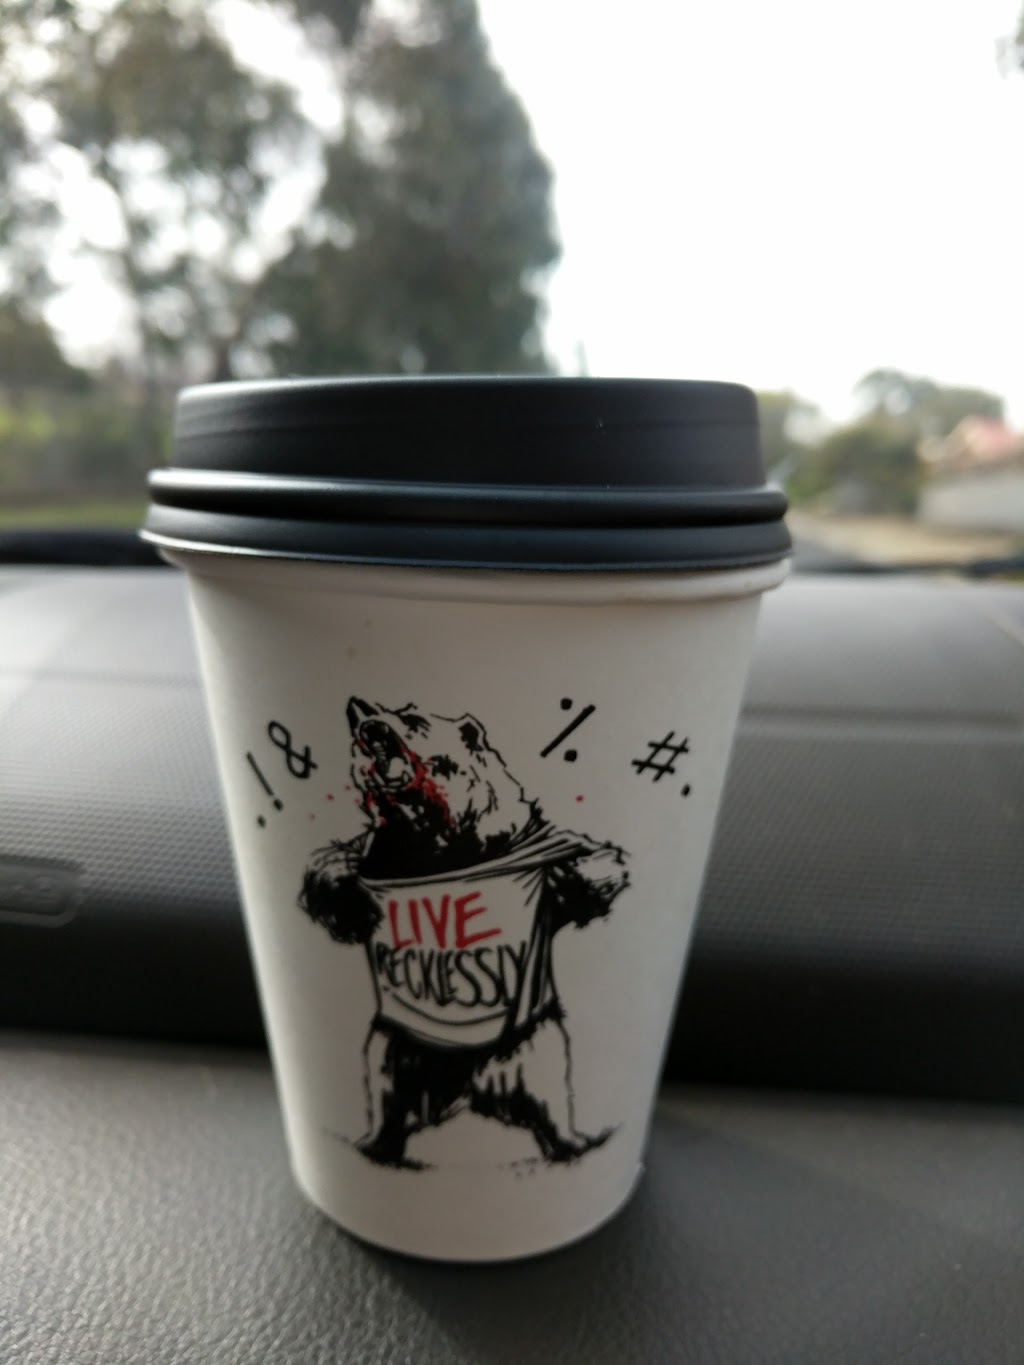 First Things First Coffee | cafe | 373 Main N Rd, Enfield SA 5085, Australia | 0882606240 OR +61 8 8260 6240